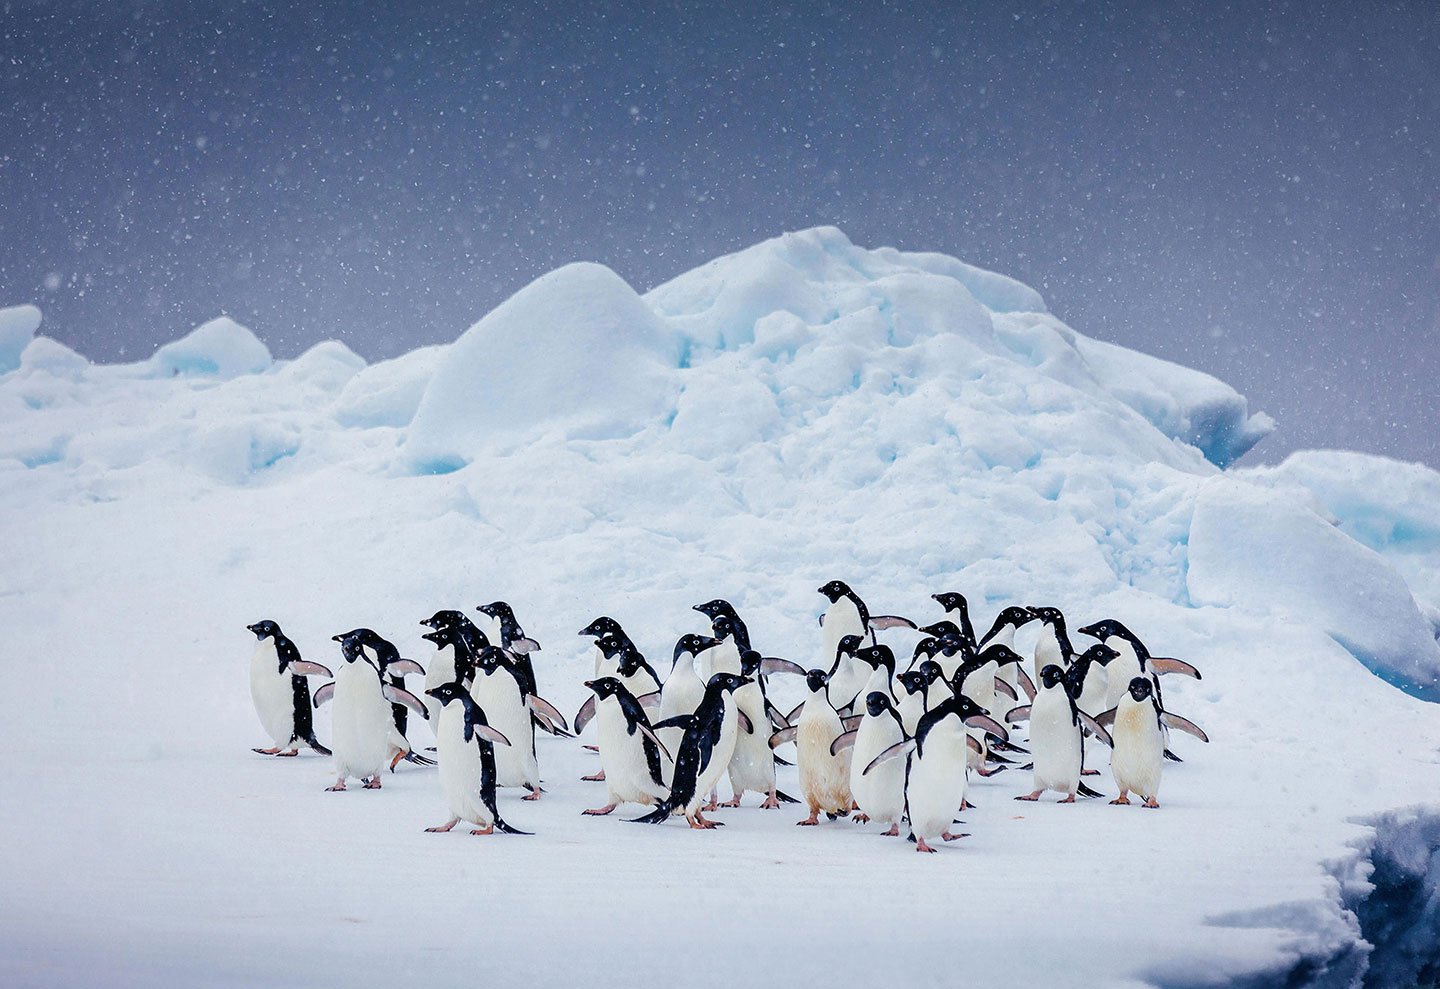 How to see penguins in Antarctica safely